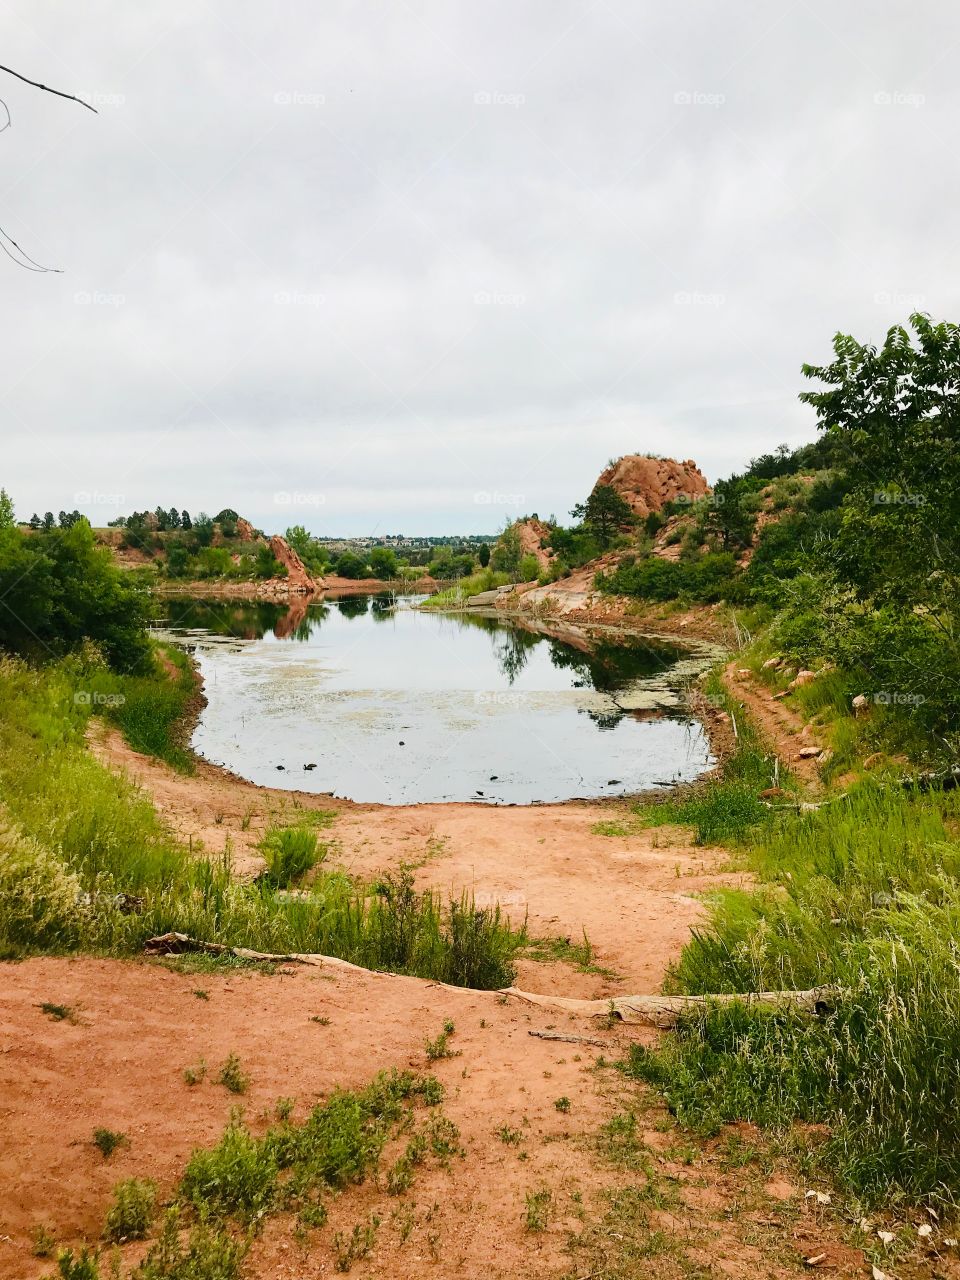 The lake at red rock open space in Colorado Springs, Colorado on an overcast summer day